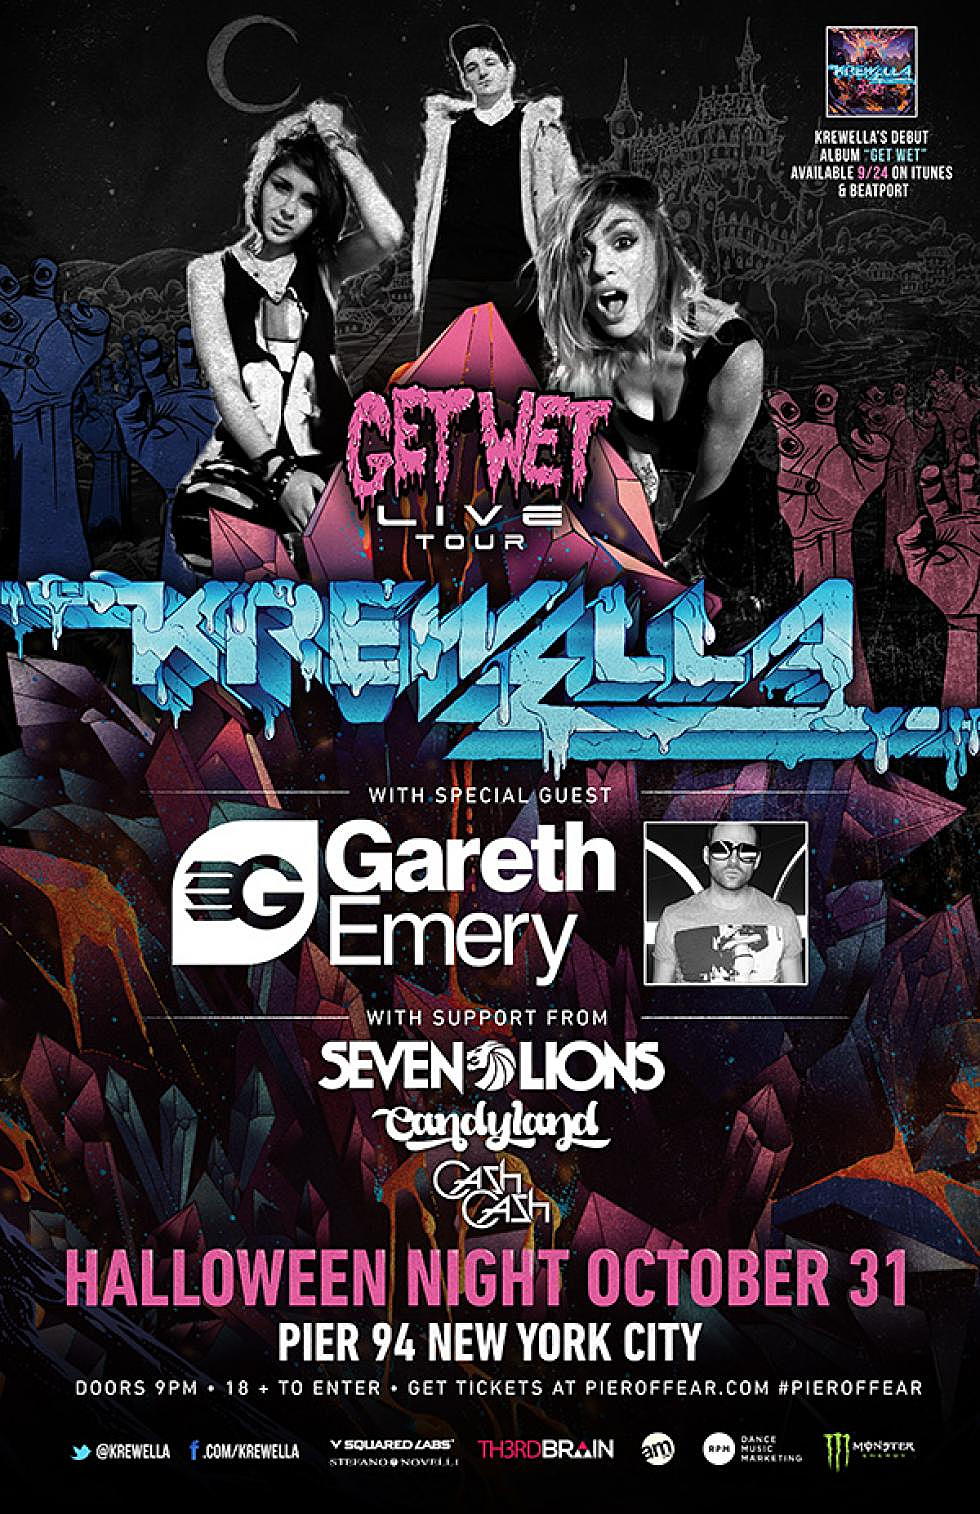 Contest: Win a pair of VIP tickets for Krewella @ Pier Of Fear, NYC 10/31